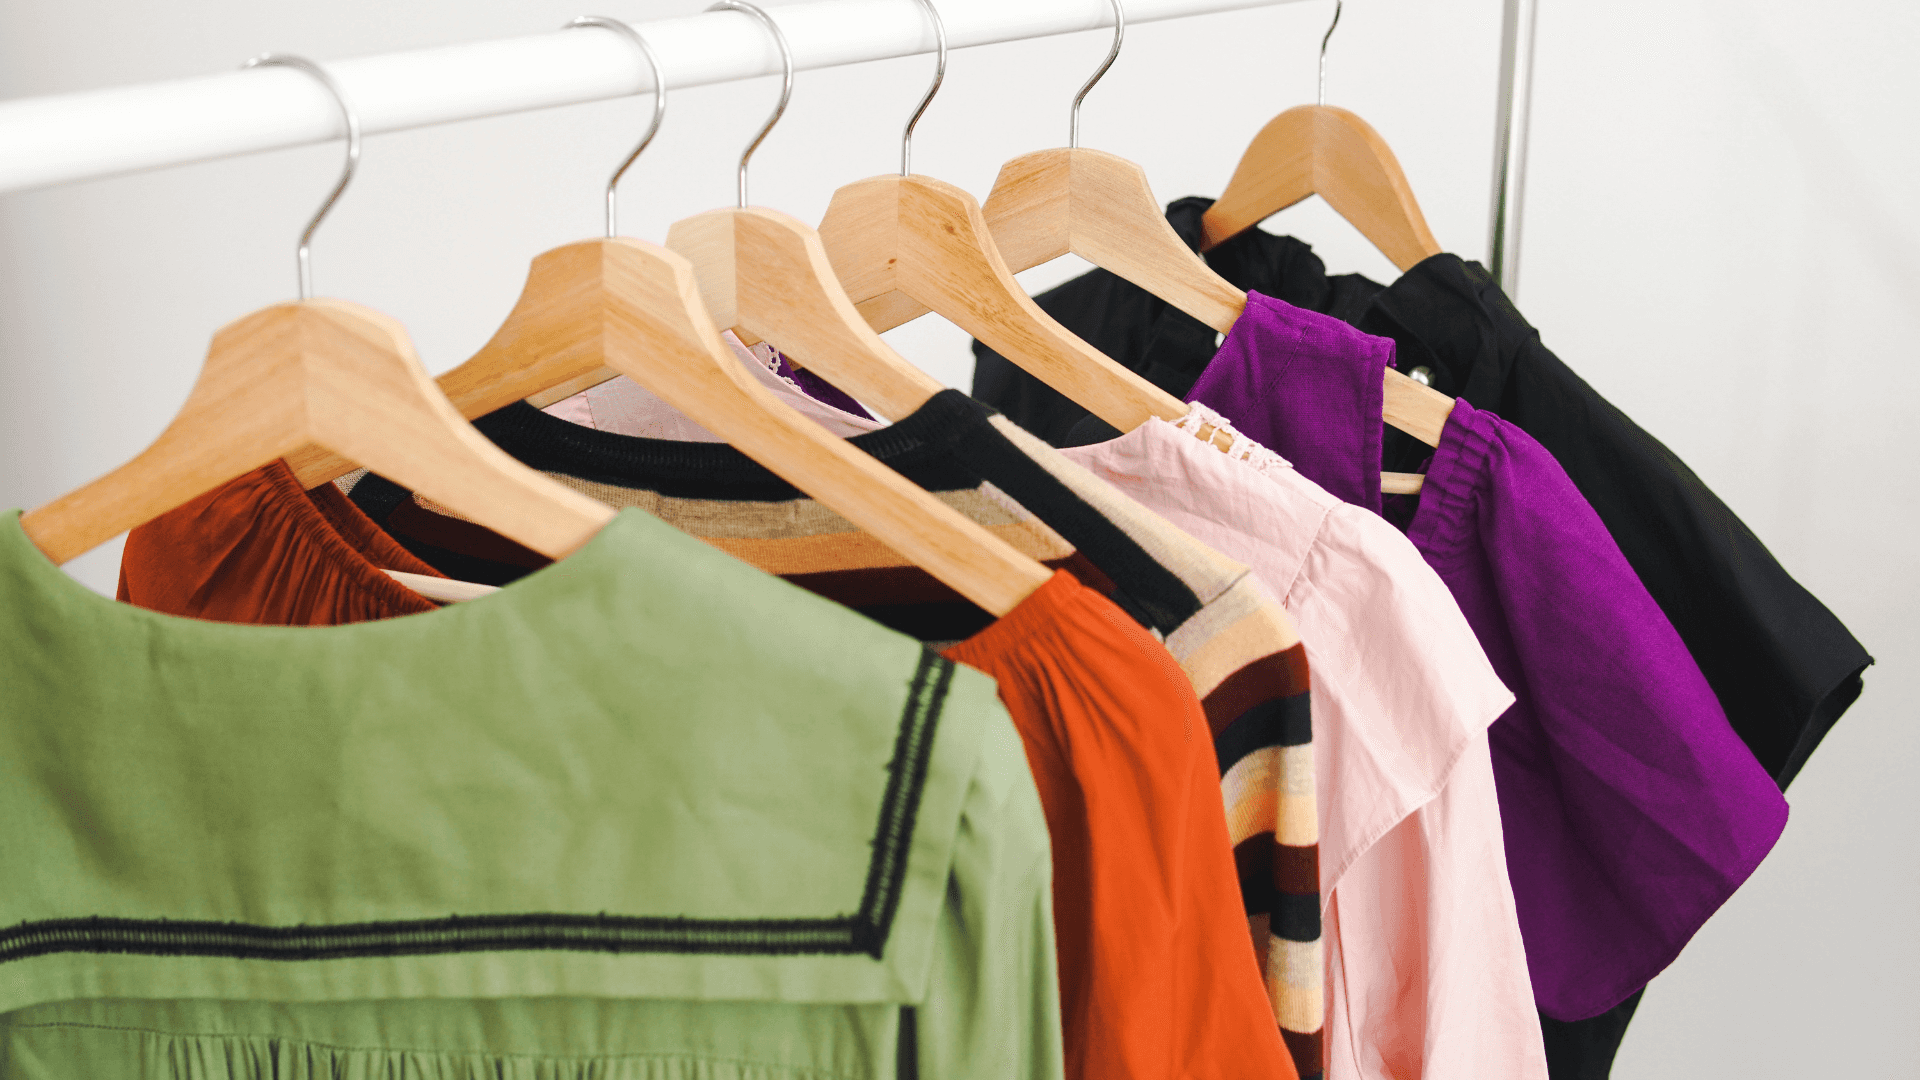 A Rack Of Clothes Hanging On A Wooden Rack